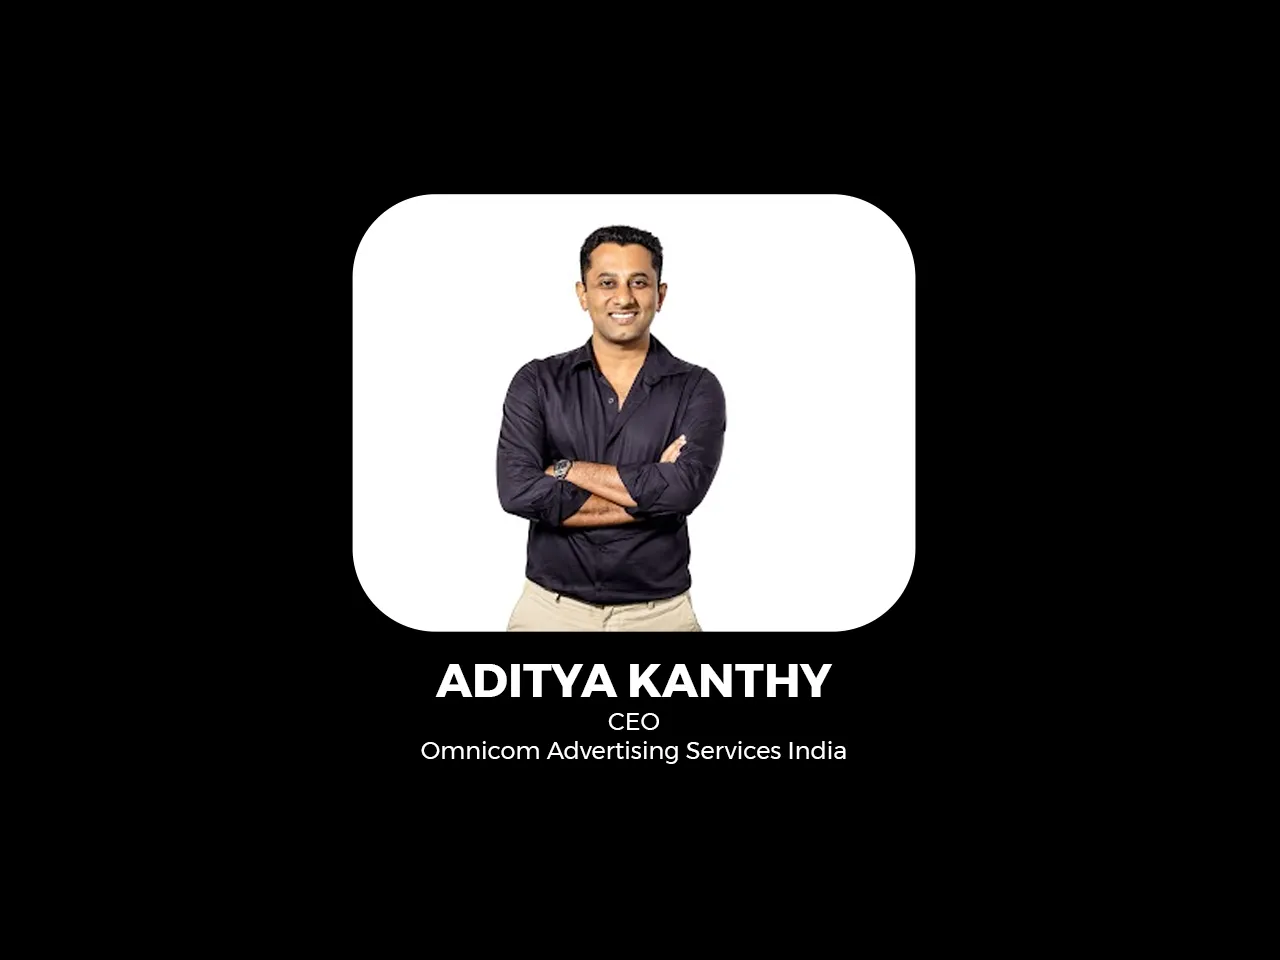 DDB’s Aditya Kanthy appointed as CEO of newly formed Omnicom Advertising Services in India